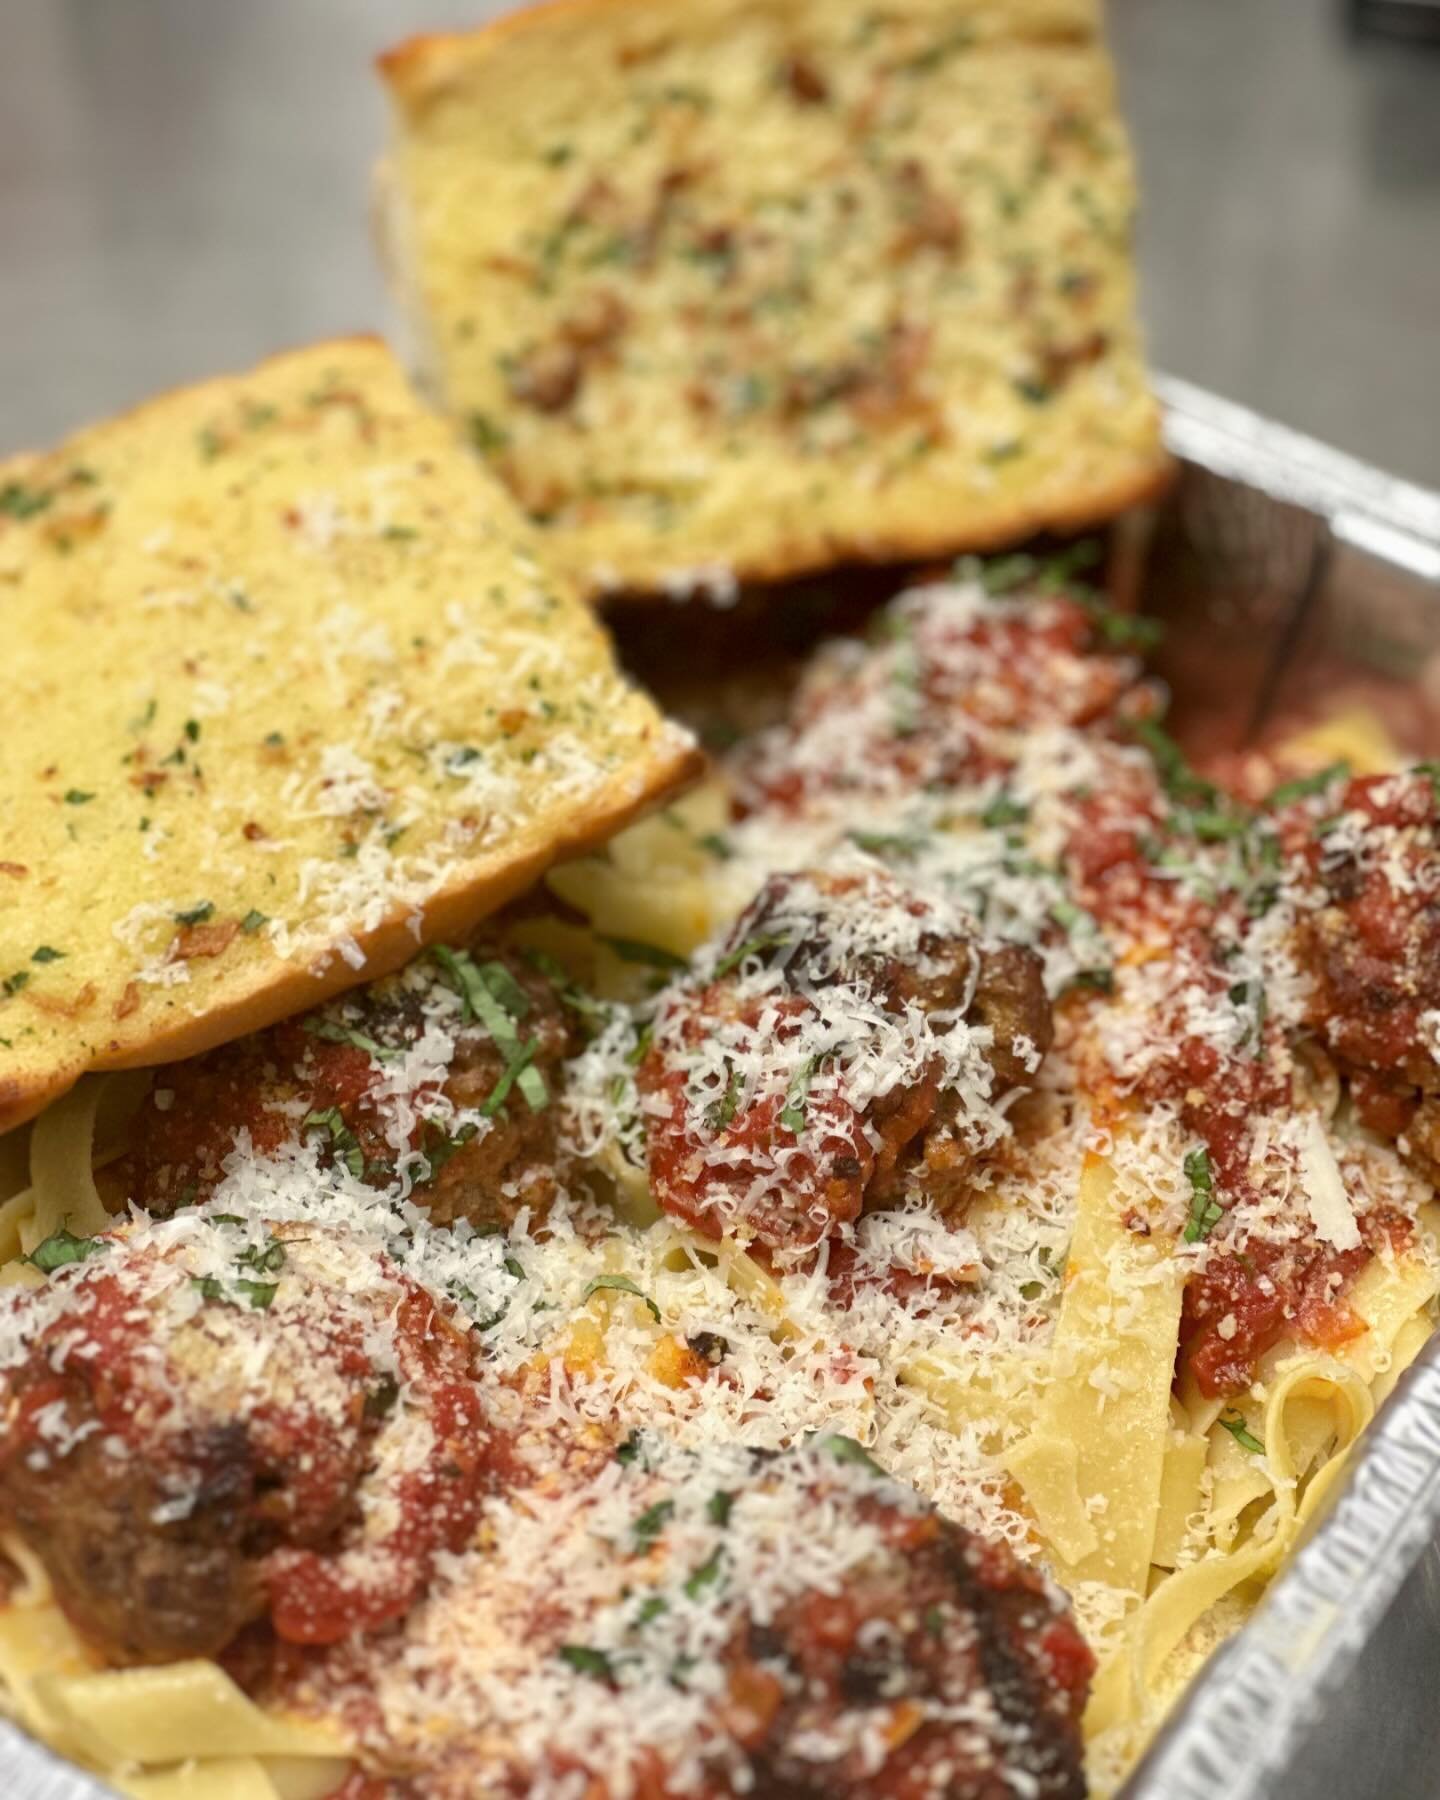 POLL TIME 🗳️

Which are you ordering for dinner this week?

1. House-made meatballs with marinara over pappardelle, fresh parmesan &amp; garlic bread

2. Spring Tuscan chicken quinoa bake with Kalamata olives, artichoke hearts, pepperoncini, bell pe